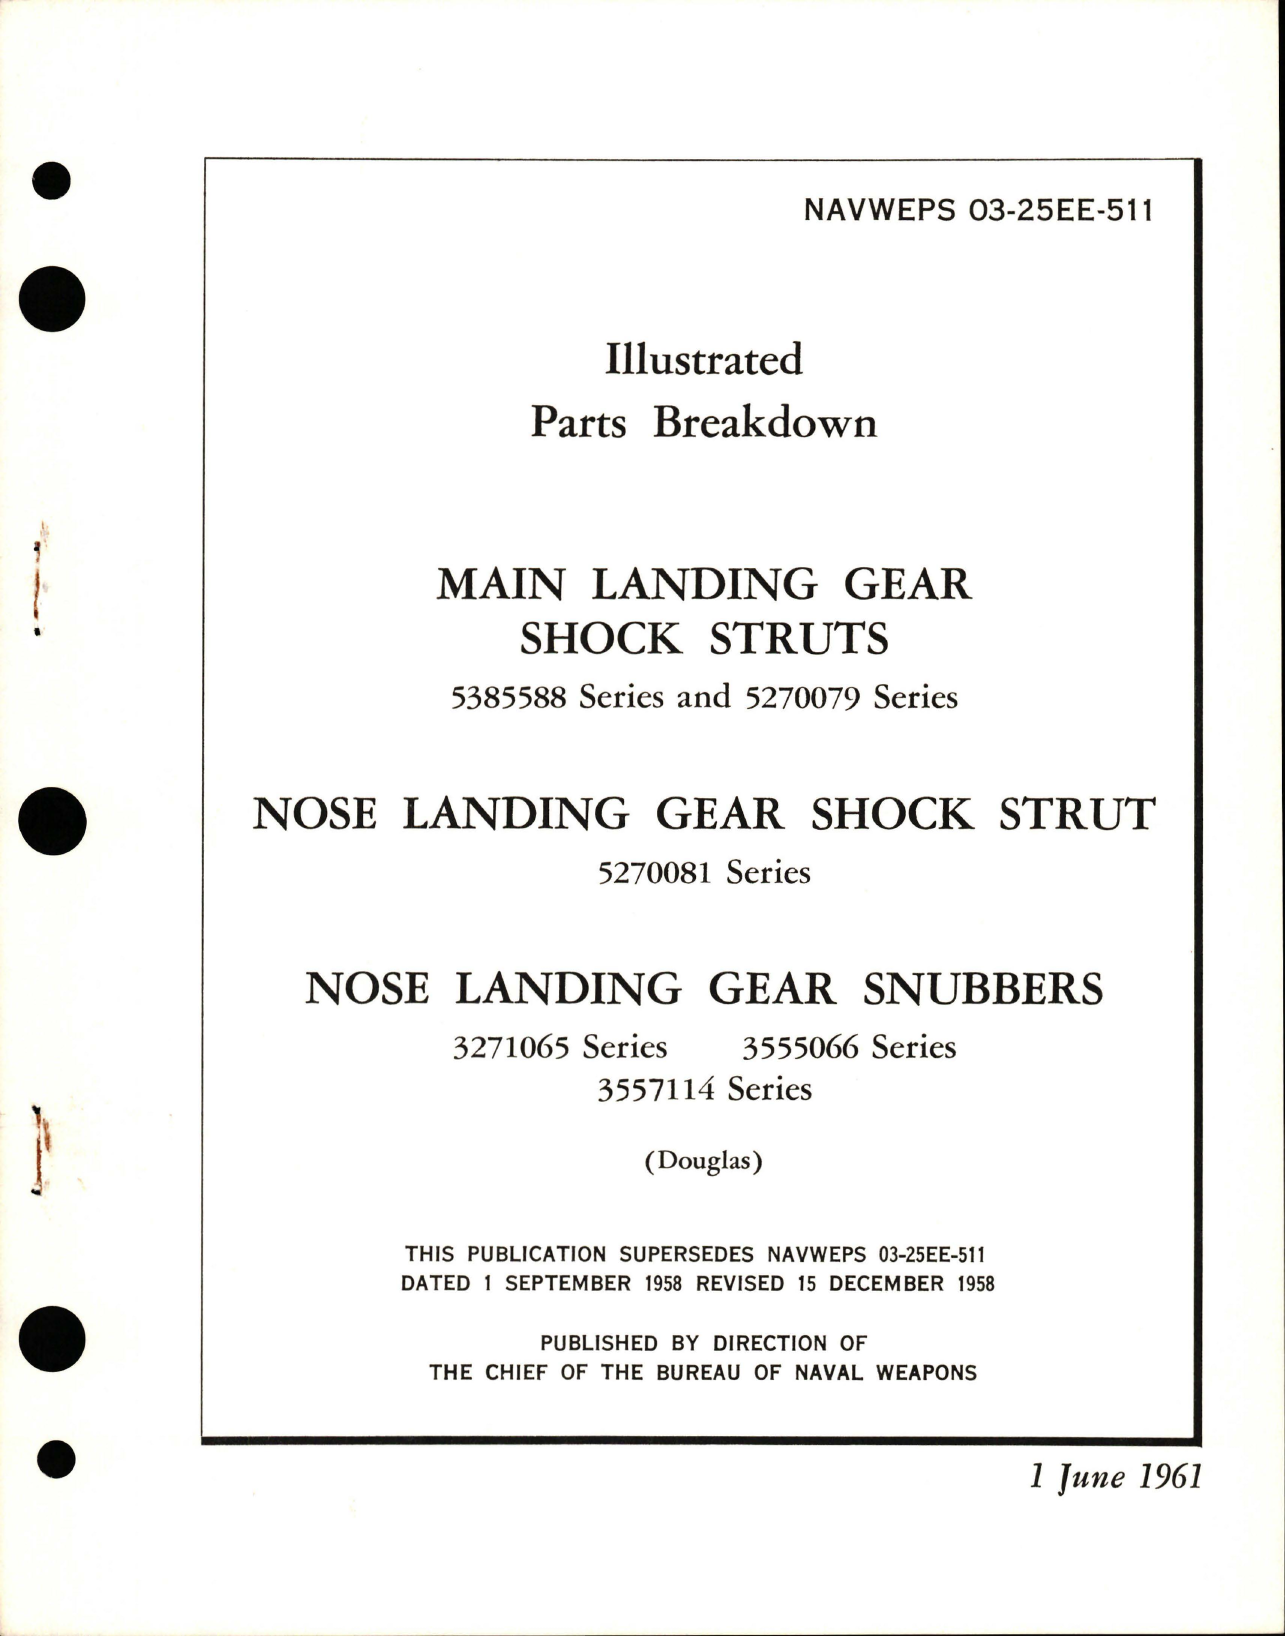 Sample page 1 from AirCorps Library document: Illustrated Parts Breakdown for Main Landing Gear & Nose Landing Gear Shock Struts, Nose Landing Gear Snubbers